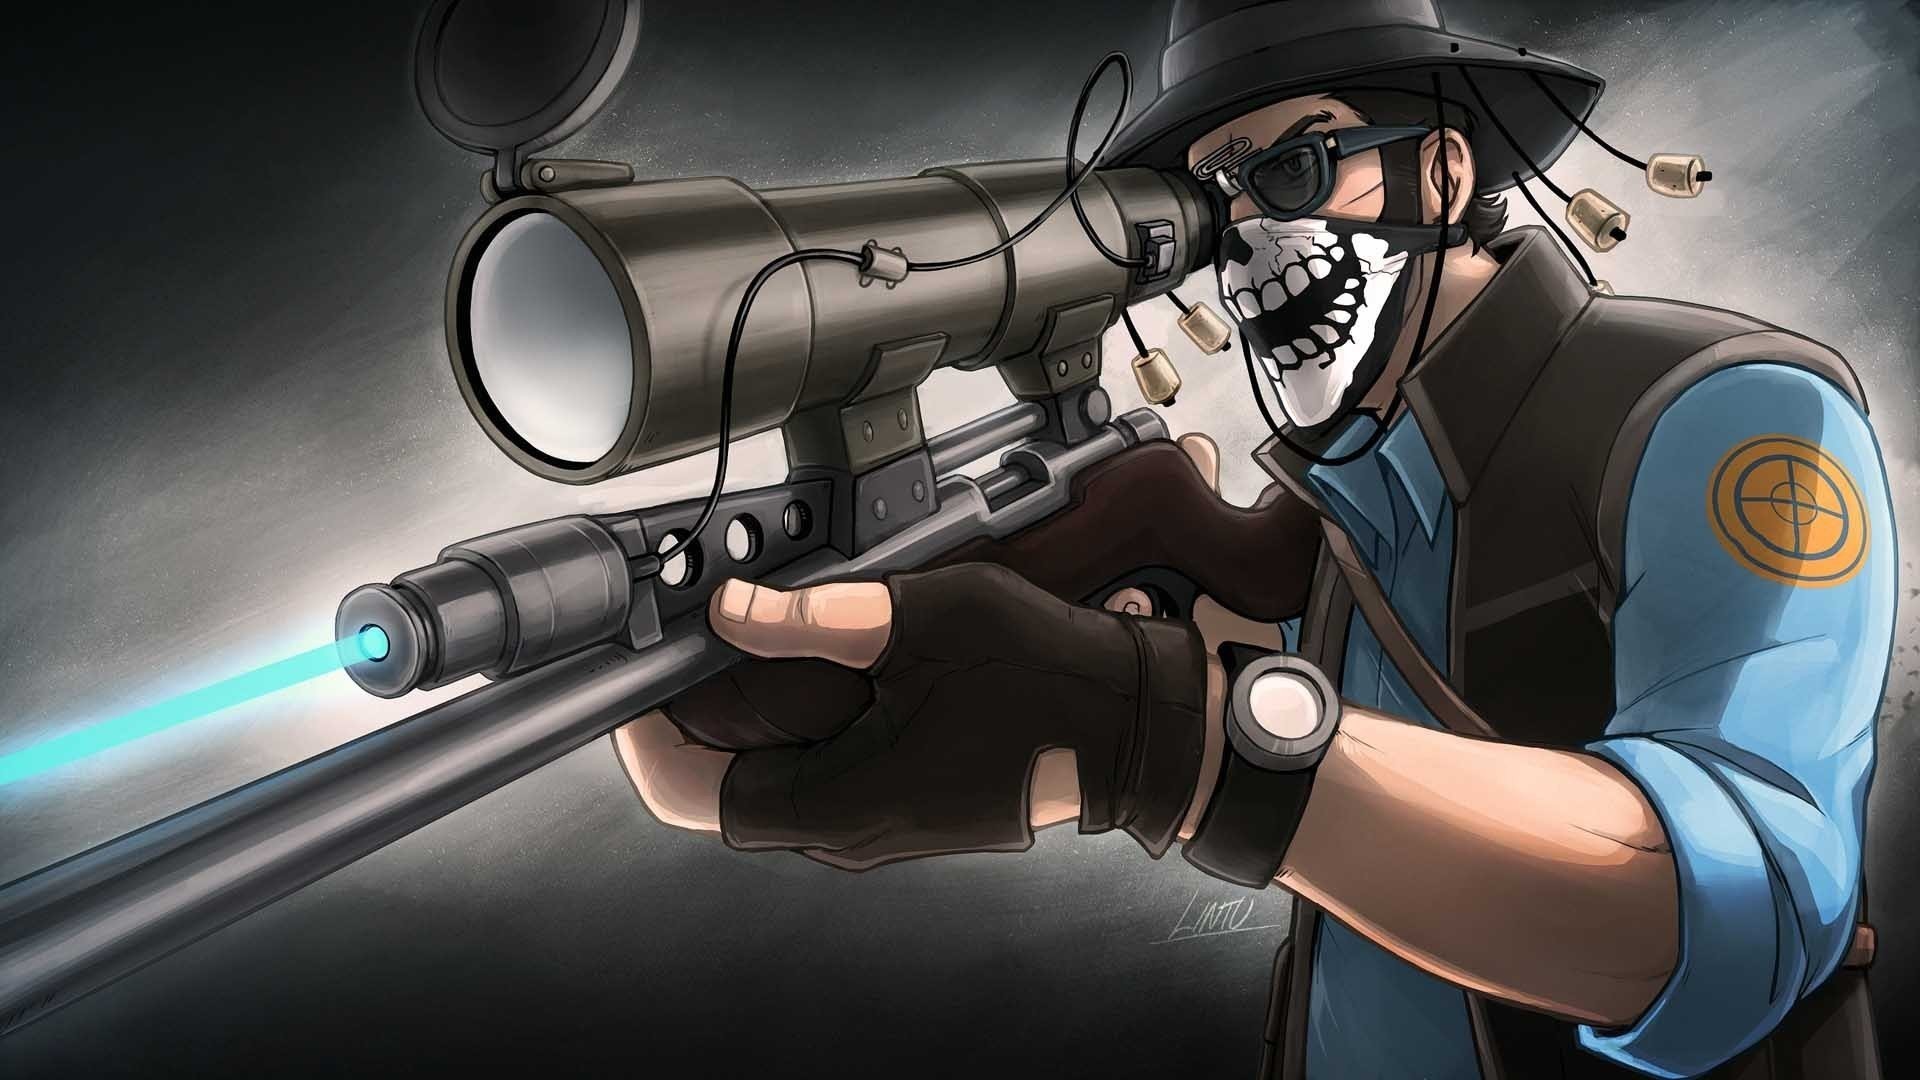 330 Team Fortress 2 HD Wallpapers